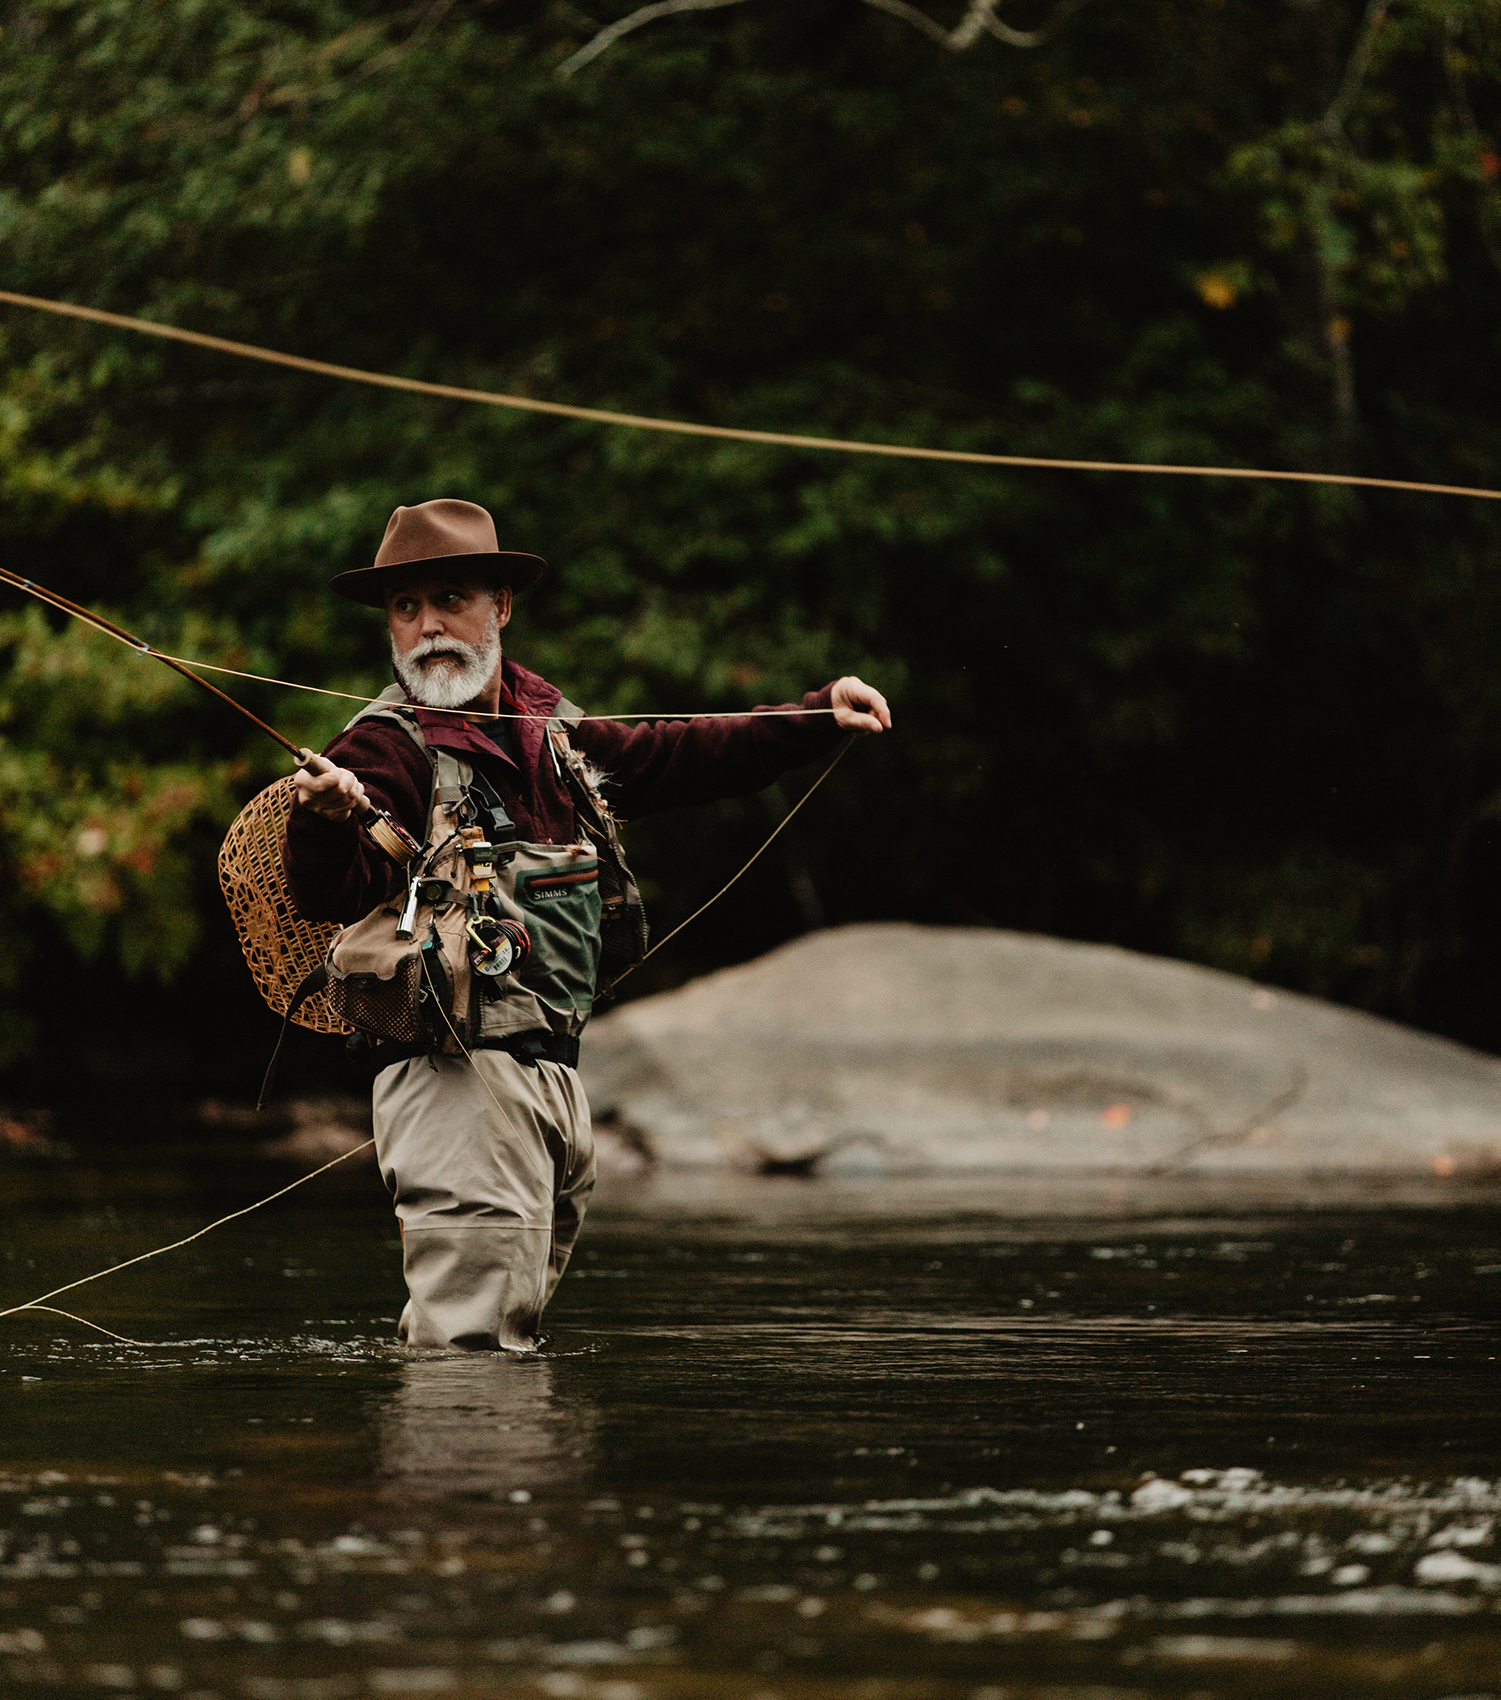 Bamboo fly rod craftsman Bill Oyster fishing in a river with the water up to his knees